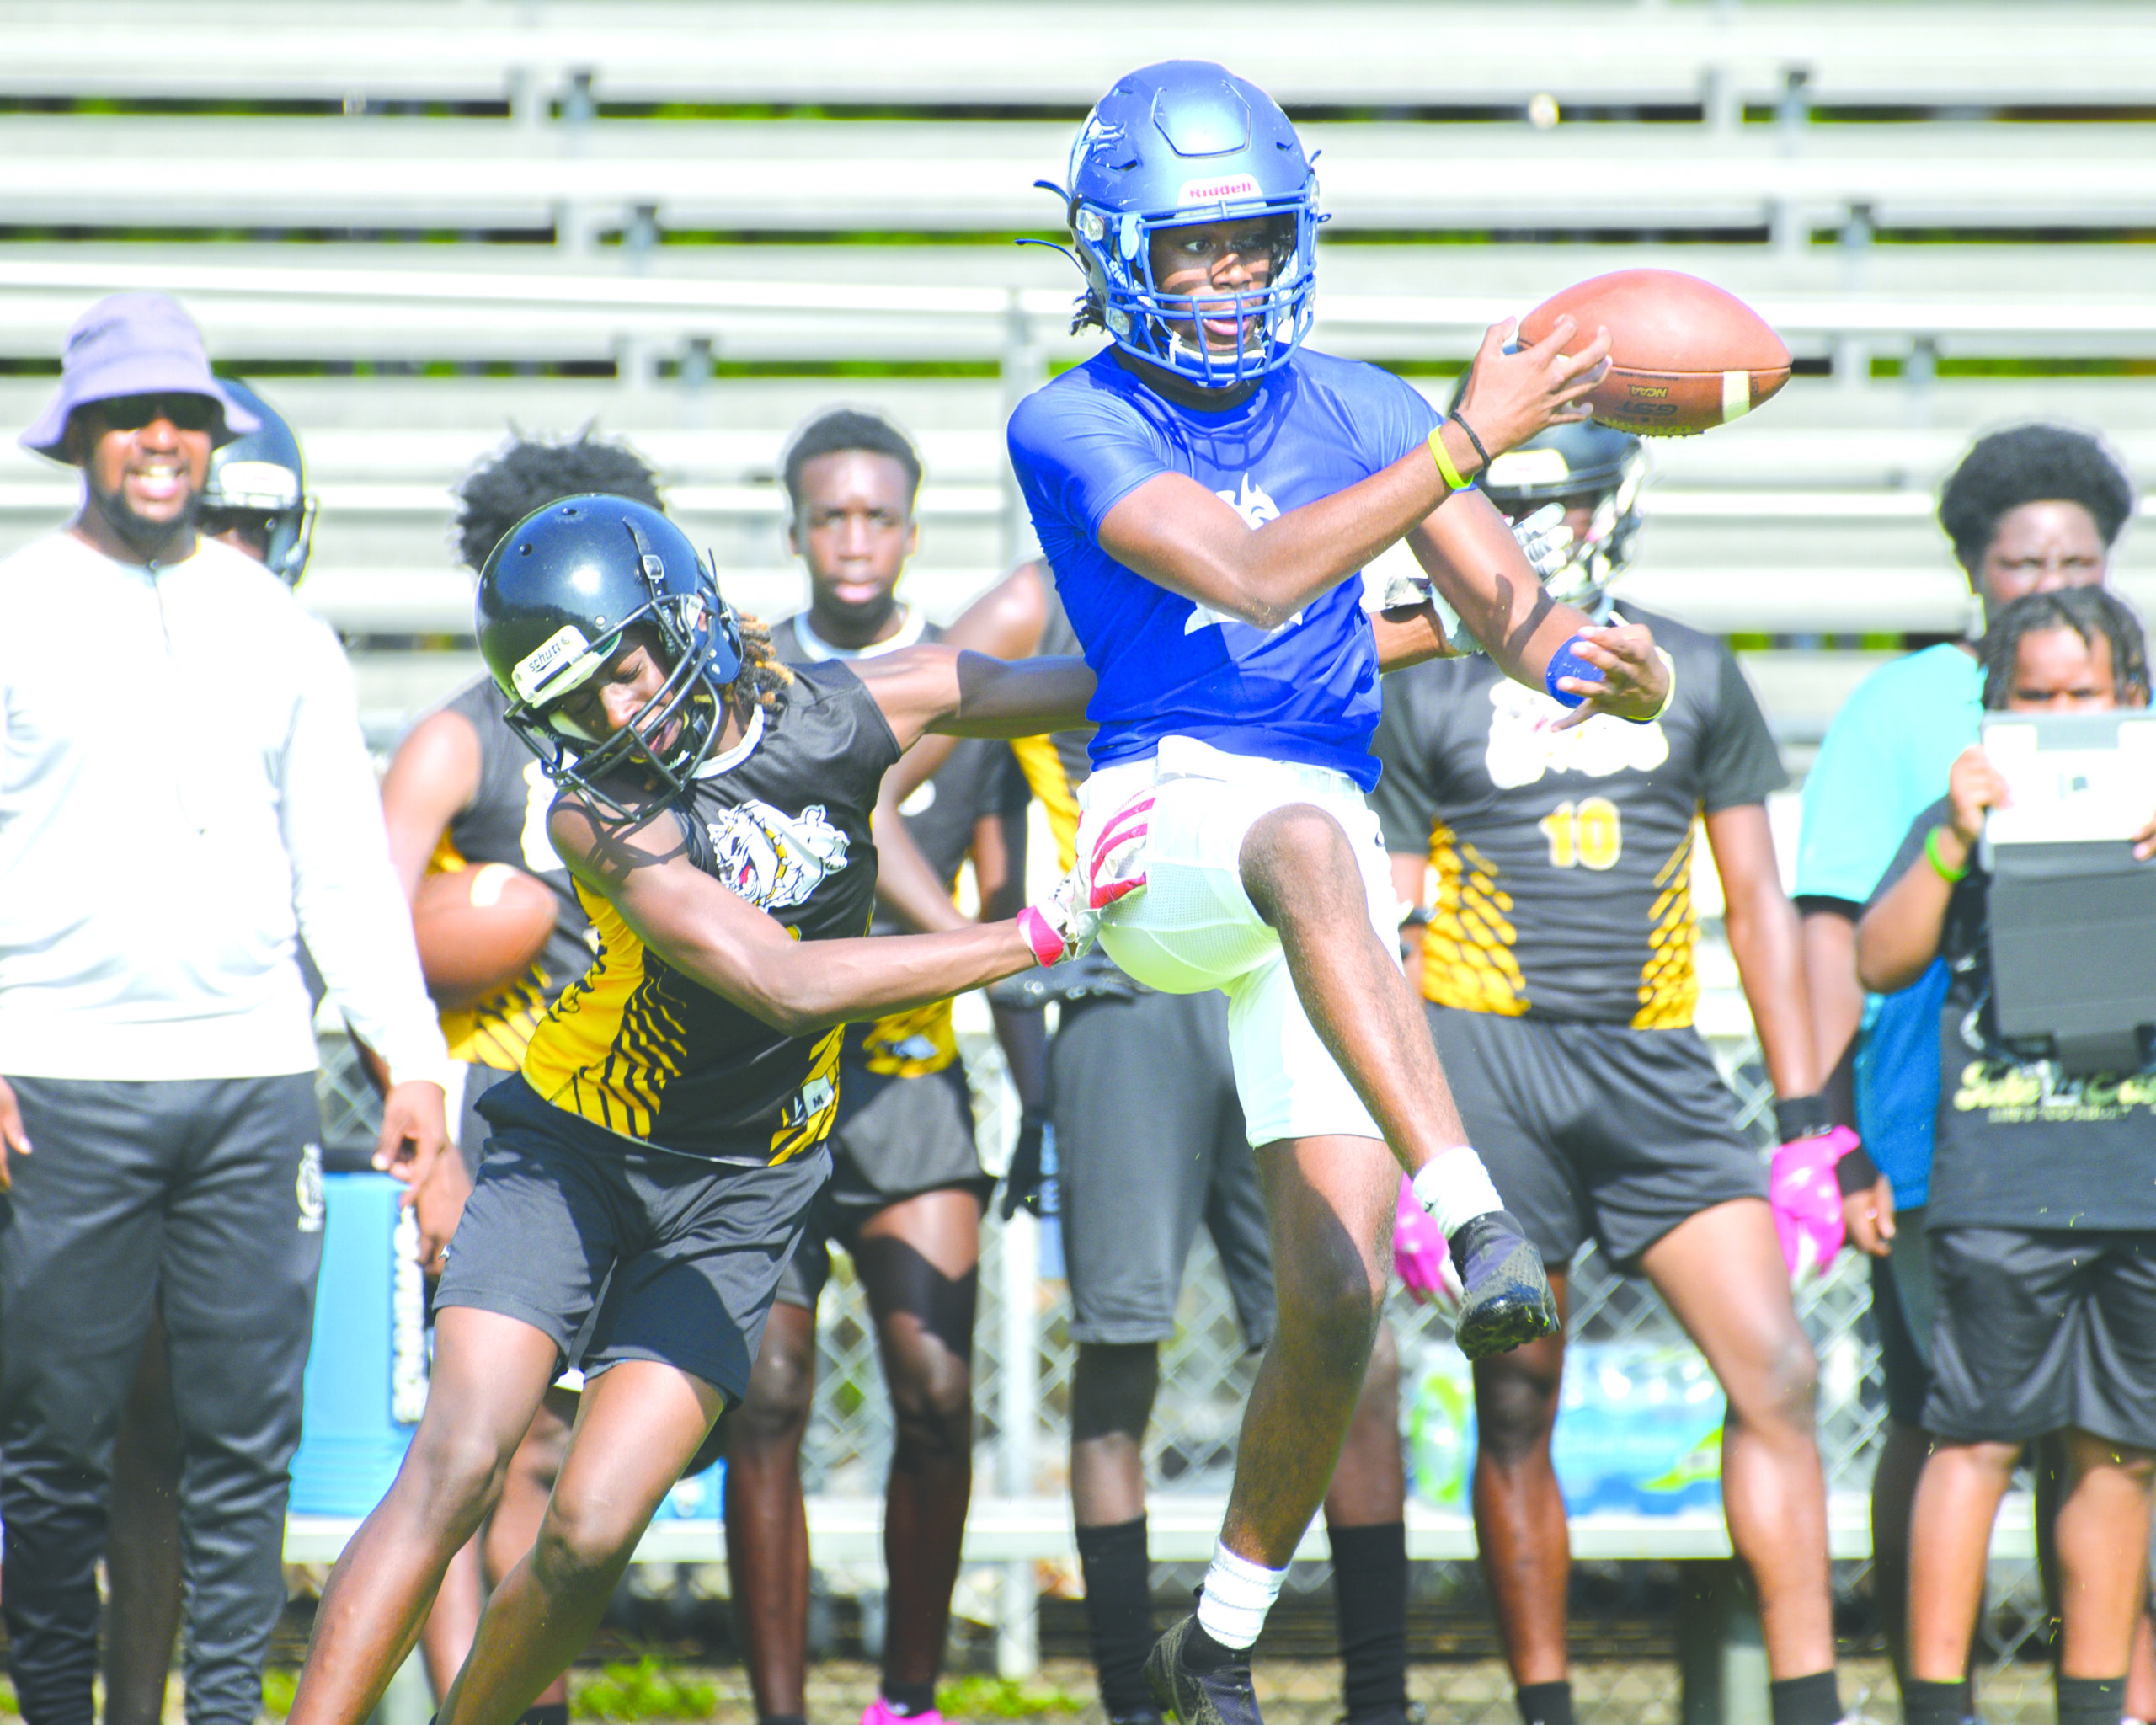 Beulah, LaFayette, Notasulga Face Off in 7-on-7 